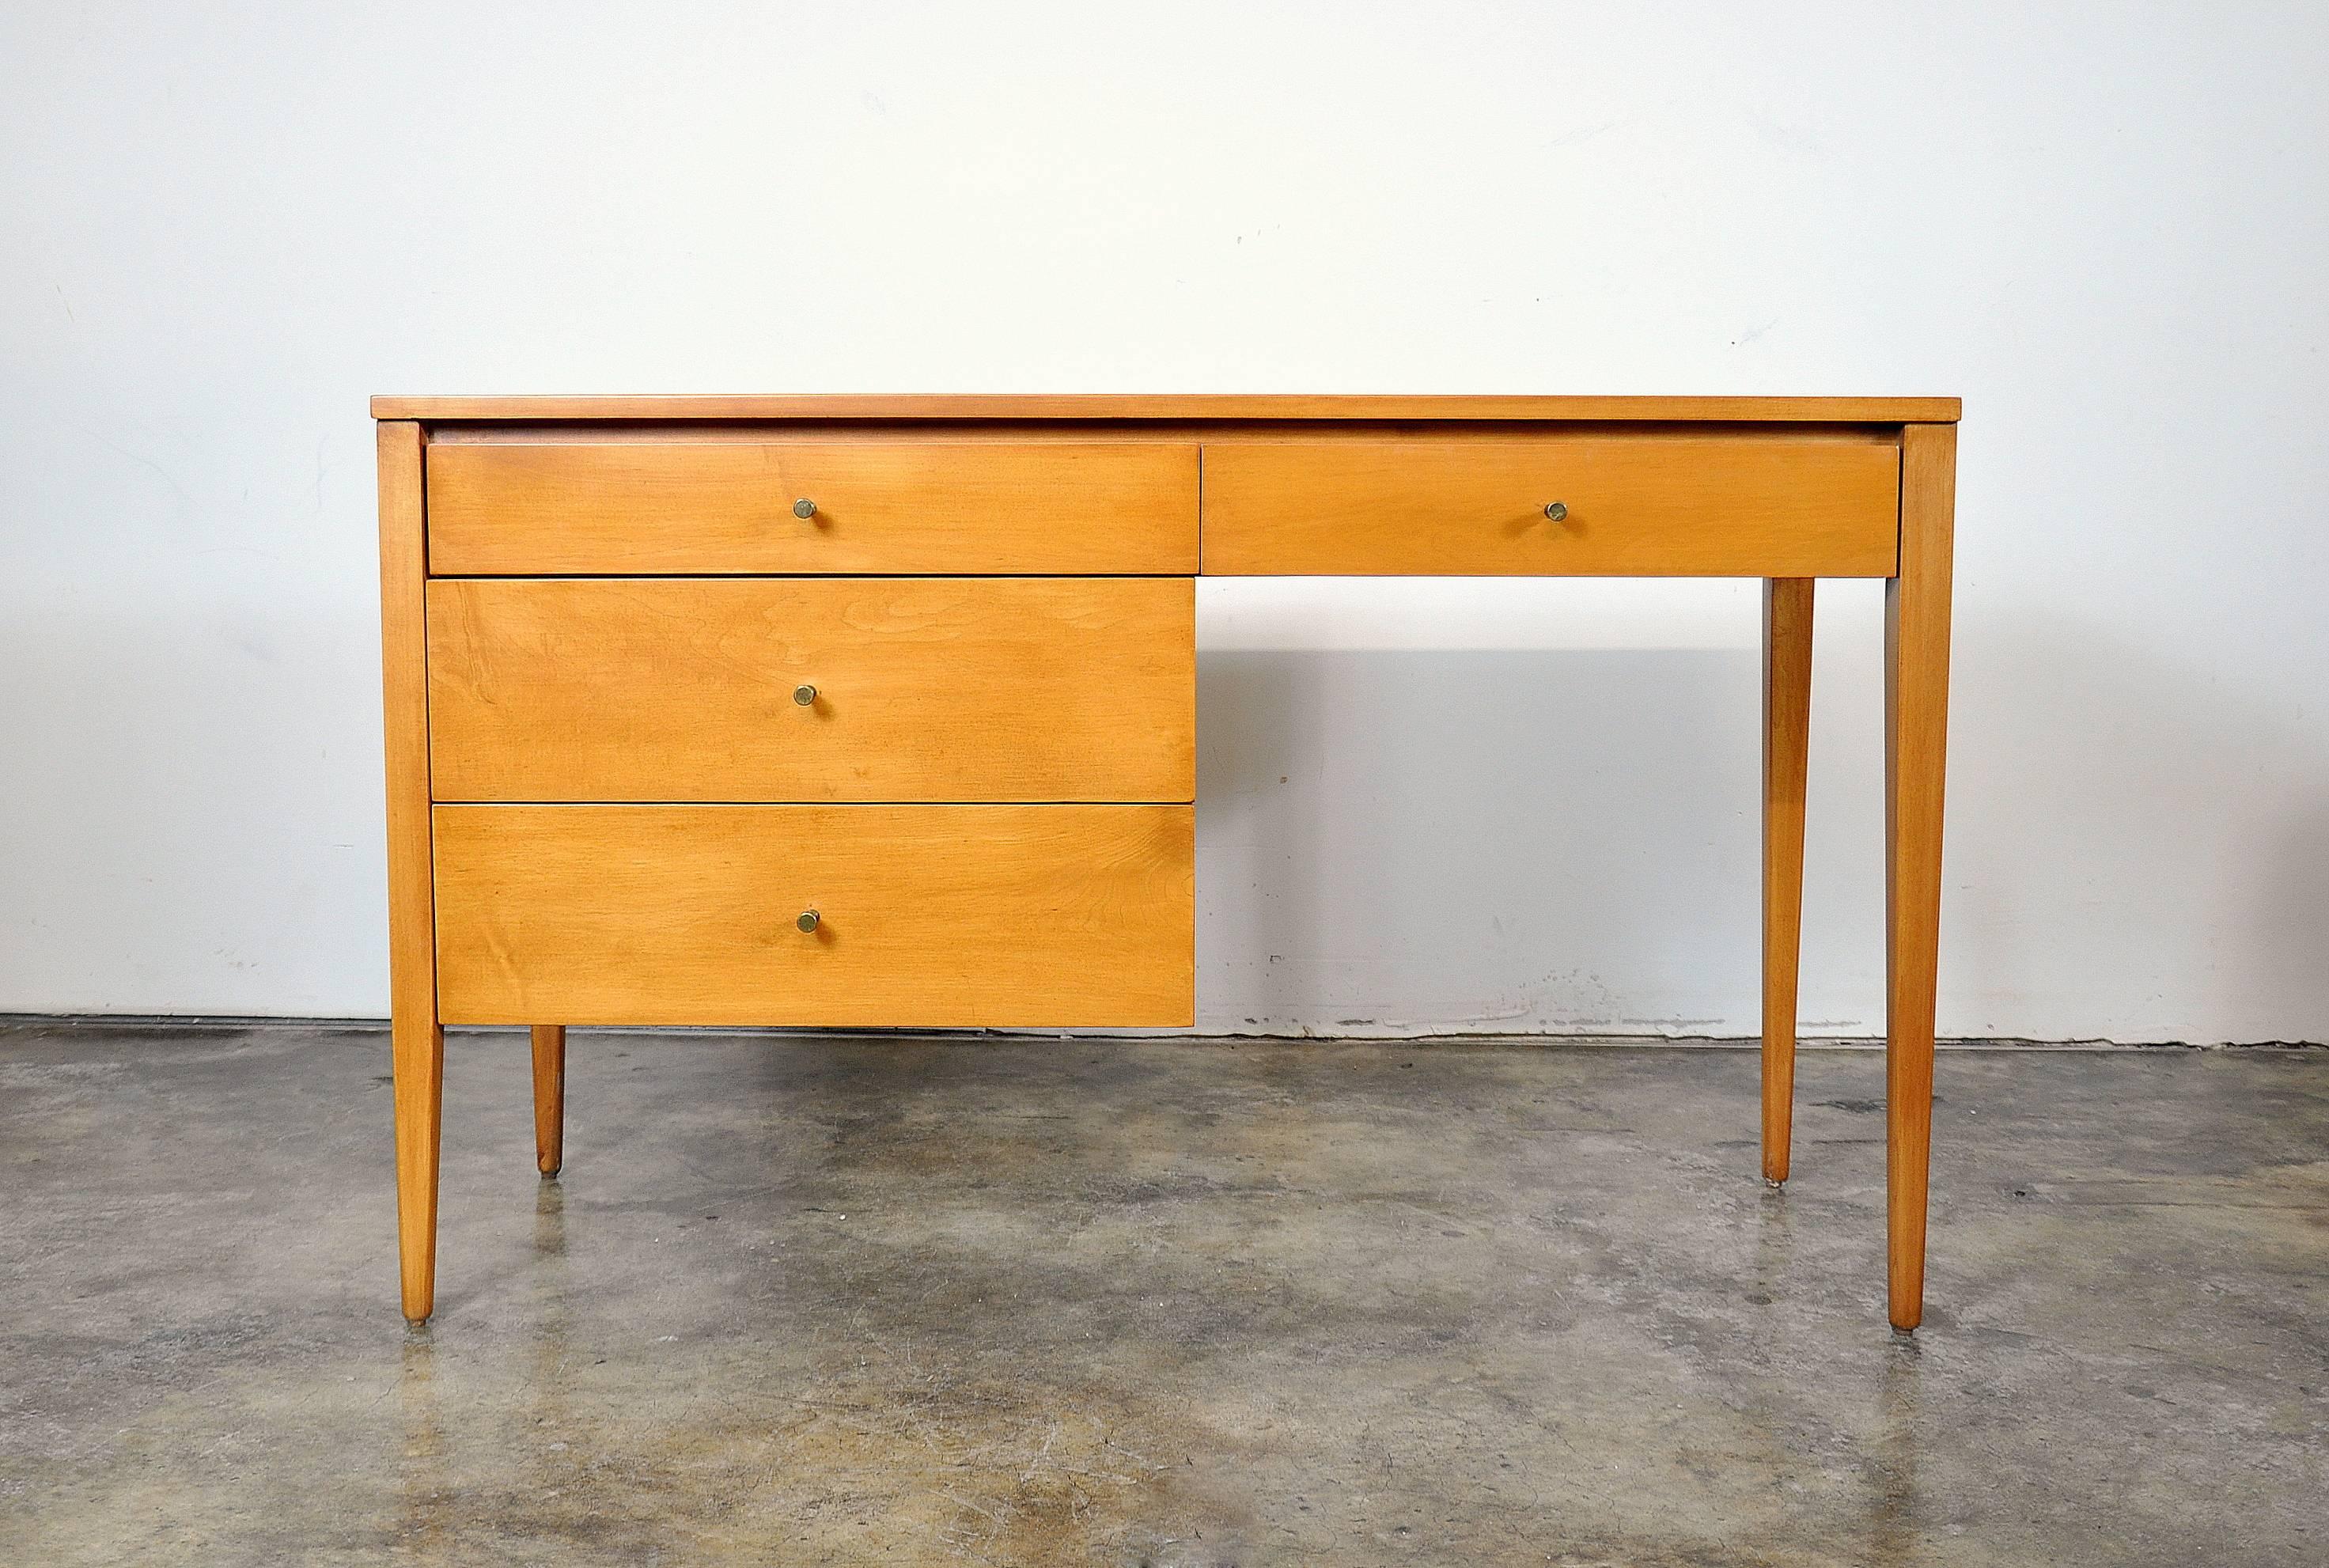 A wonderful Mid-Century Modern vintage writing desk or vanity table designed by Paul McCobb for the immensely popular Planner Group line, manufactured by Winchendon Furniture in the 1950s. Professionally refinished solid maple and featuring four